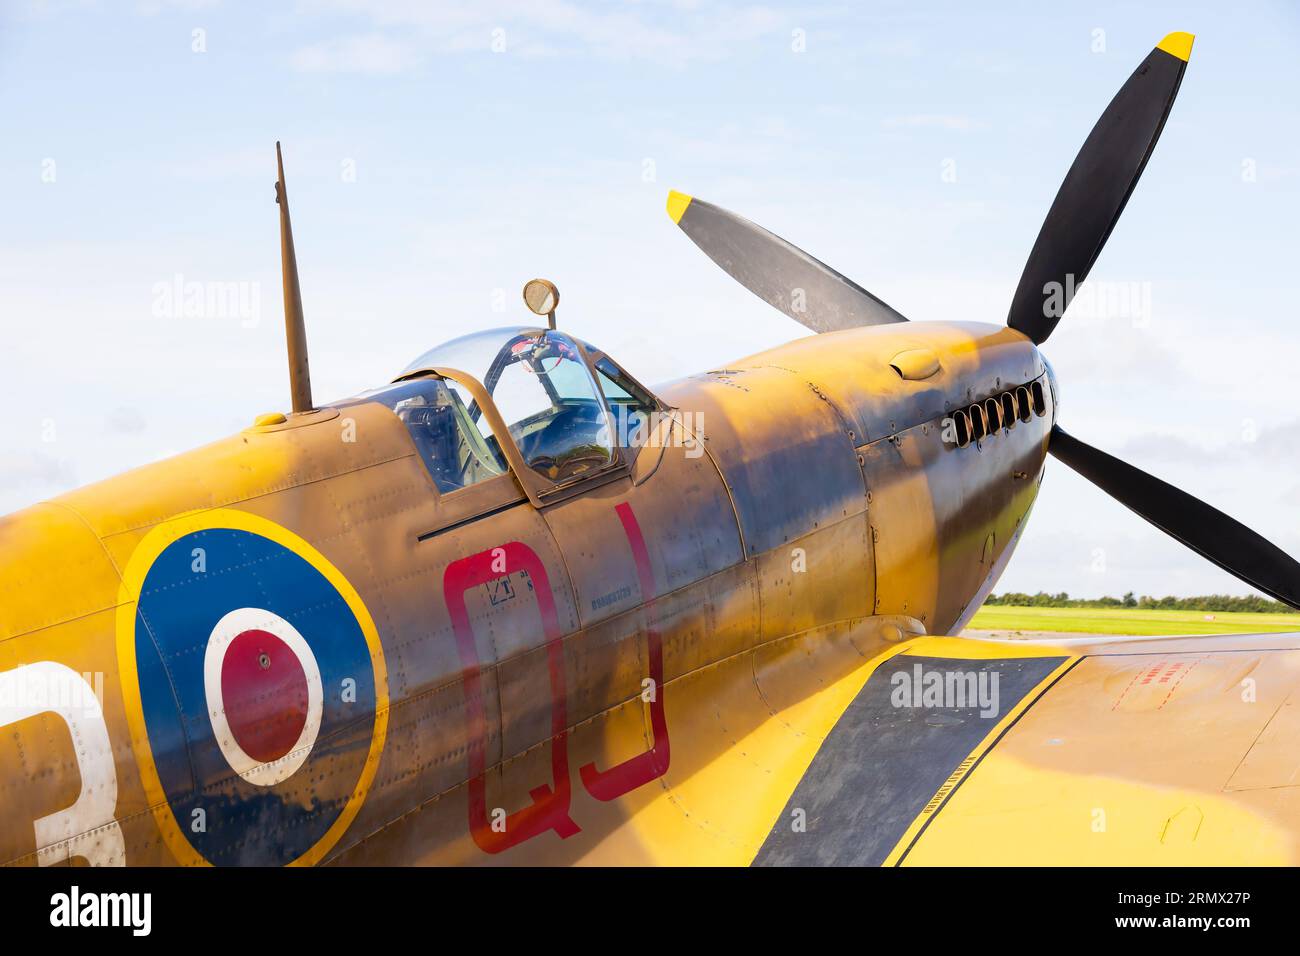 WW' fighter, Supermarine, Spitfire Mk1Xe, Low level, MK356 of the Battle of Britain Memorial Flight, RAF. On the apron at RAF Syerston, England. The a Stock Photo